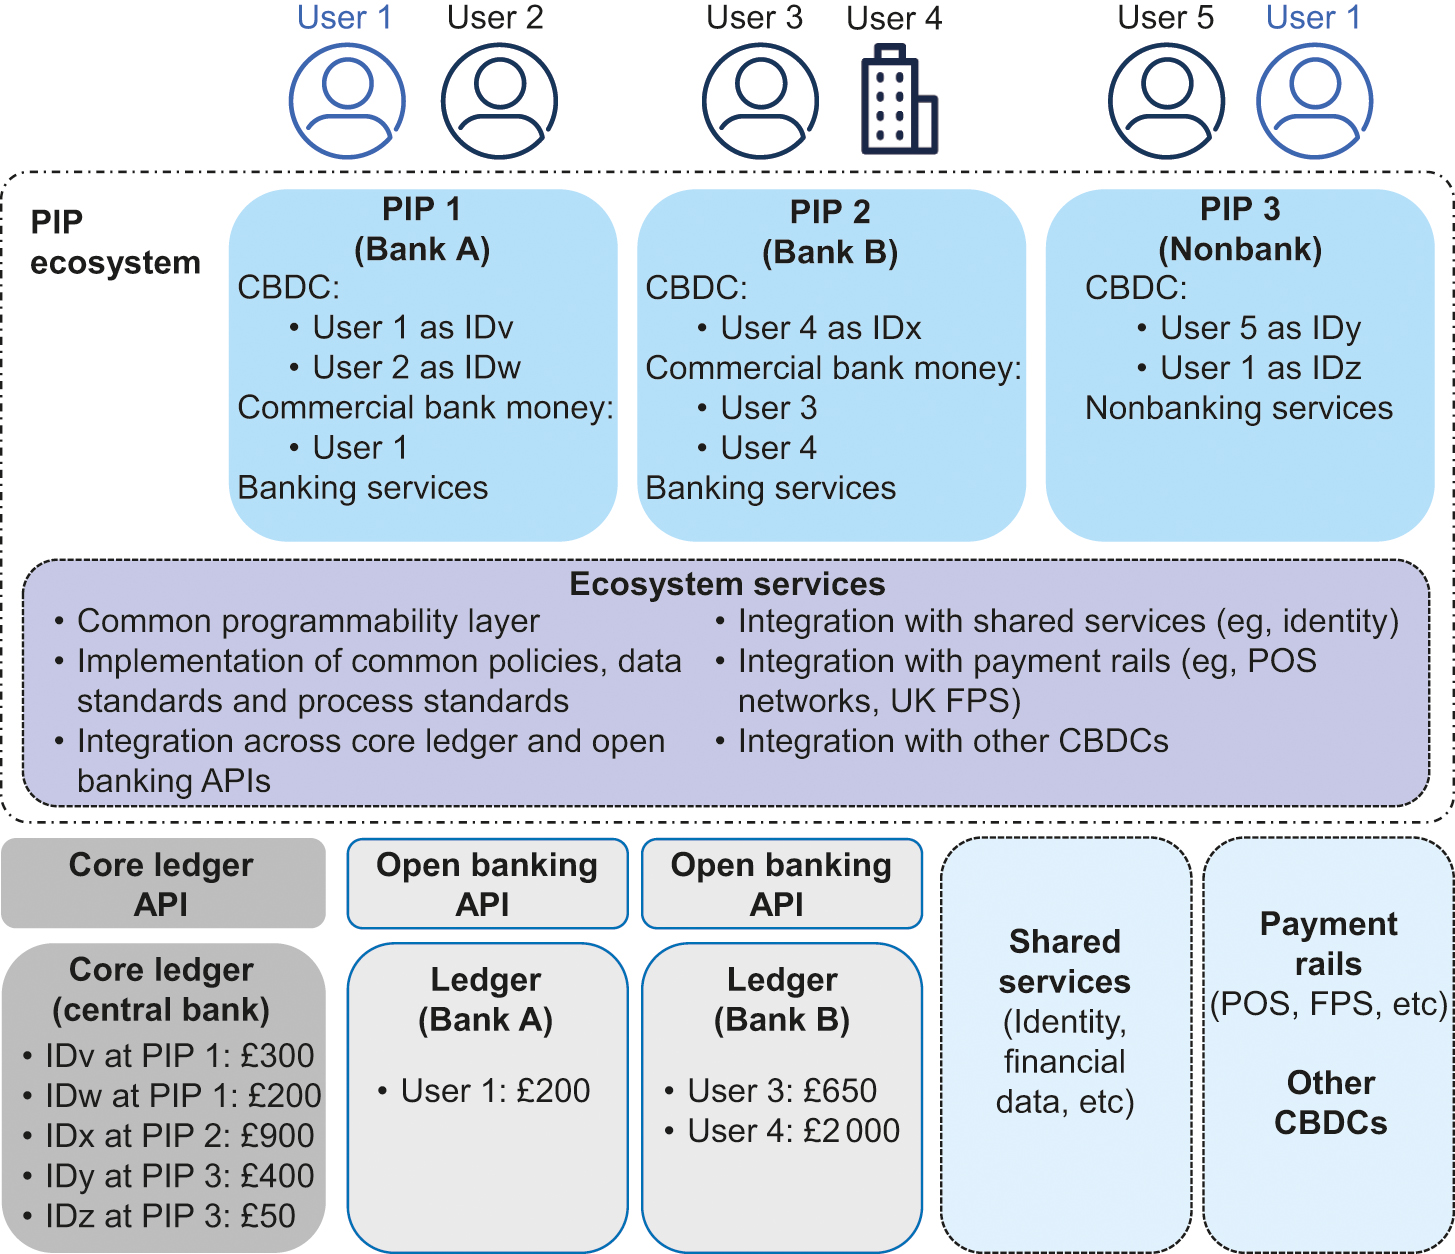 An illustrative industry architecture including common overlay services across UK CBDC and commercial bank money. There could potentially be multiple ecosystems providing competing services using different platforms and technologies but using common policies and standards. Ecosystem services may be operated by financial market infrastructures. User 1 has accounts at Bank A and the central bank, User 2 has an account at the central bank, User 3 has an account at Bank B, User 4 has accounts at Bank B and the central bank, and User 5 has an account at the central bank.